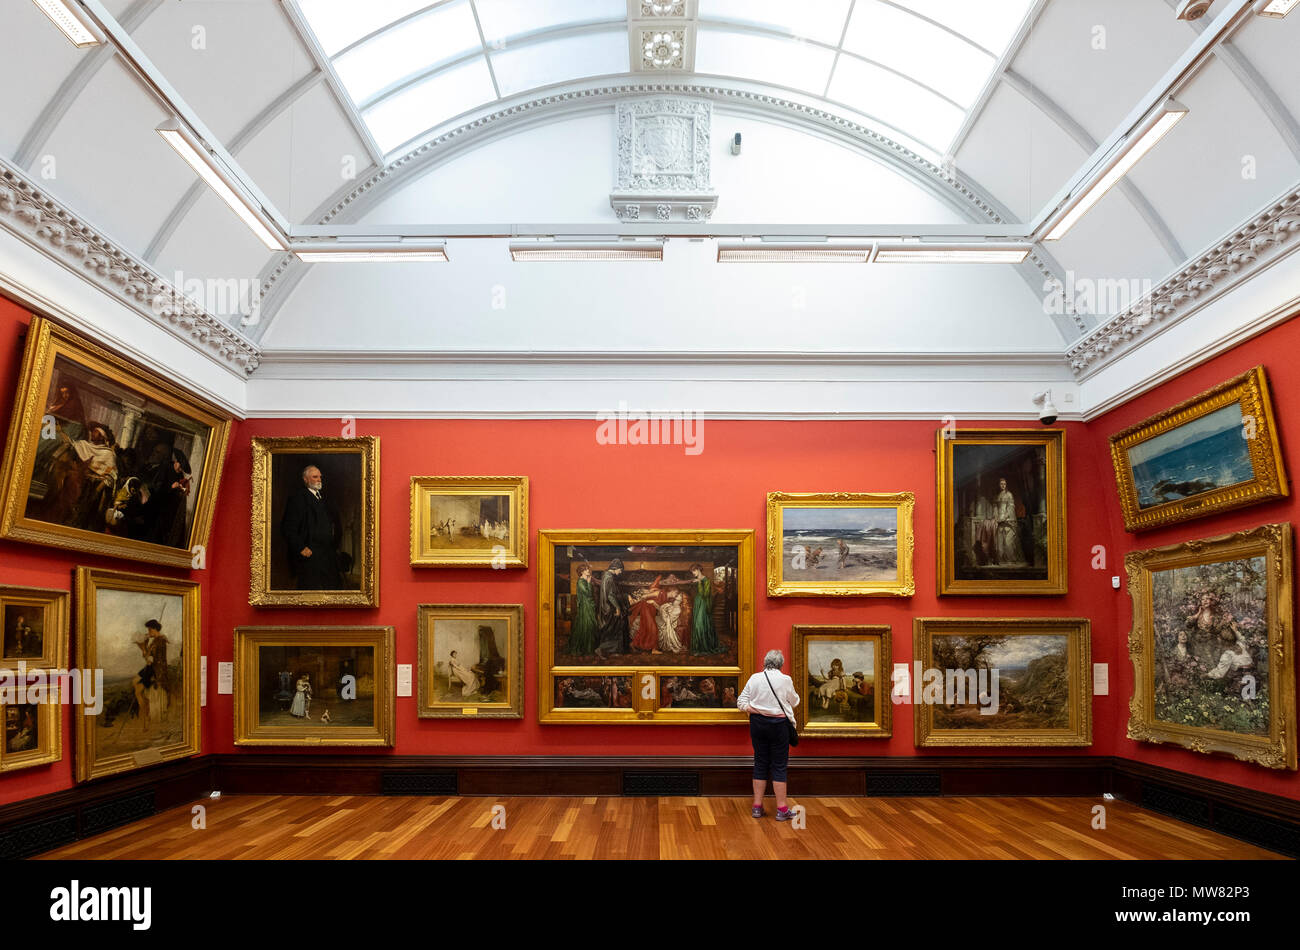 Woman looking at paintings in the Victoria Gallery  inside the McManus art gallery and museum in Dundee, Tayside, Scotland, UK Stock Photo